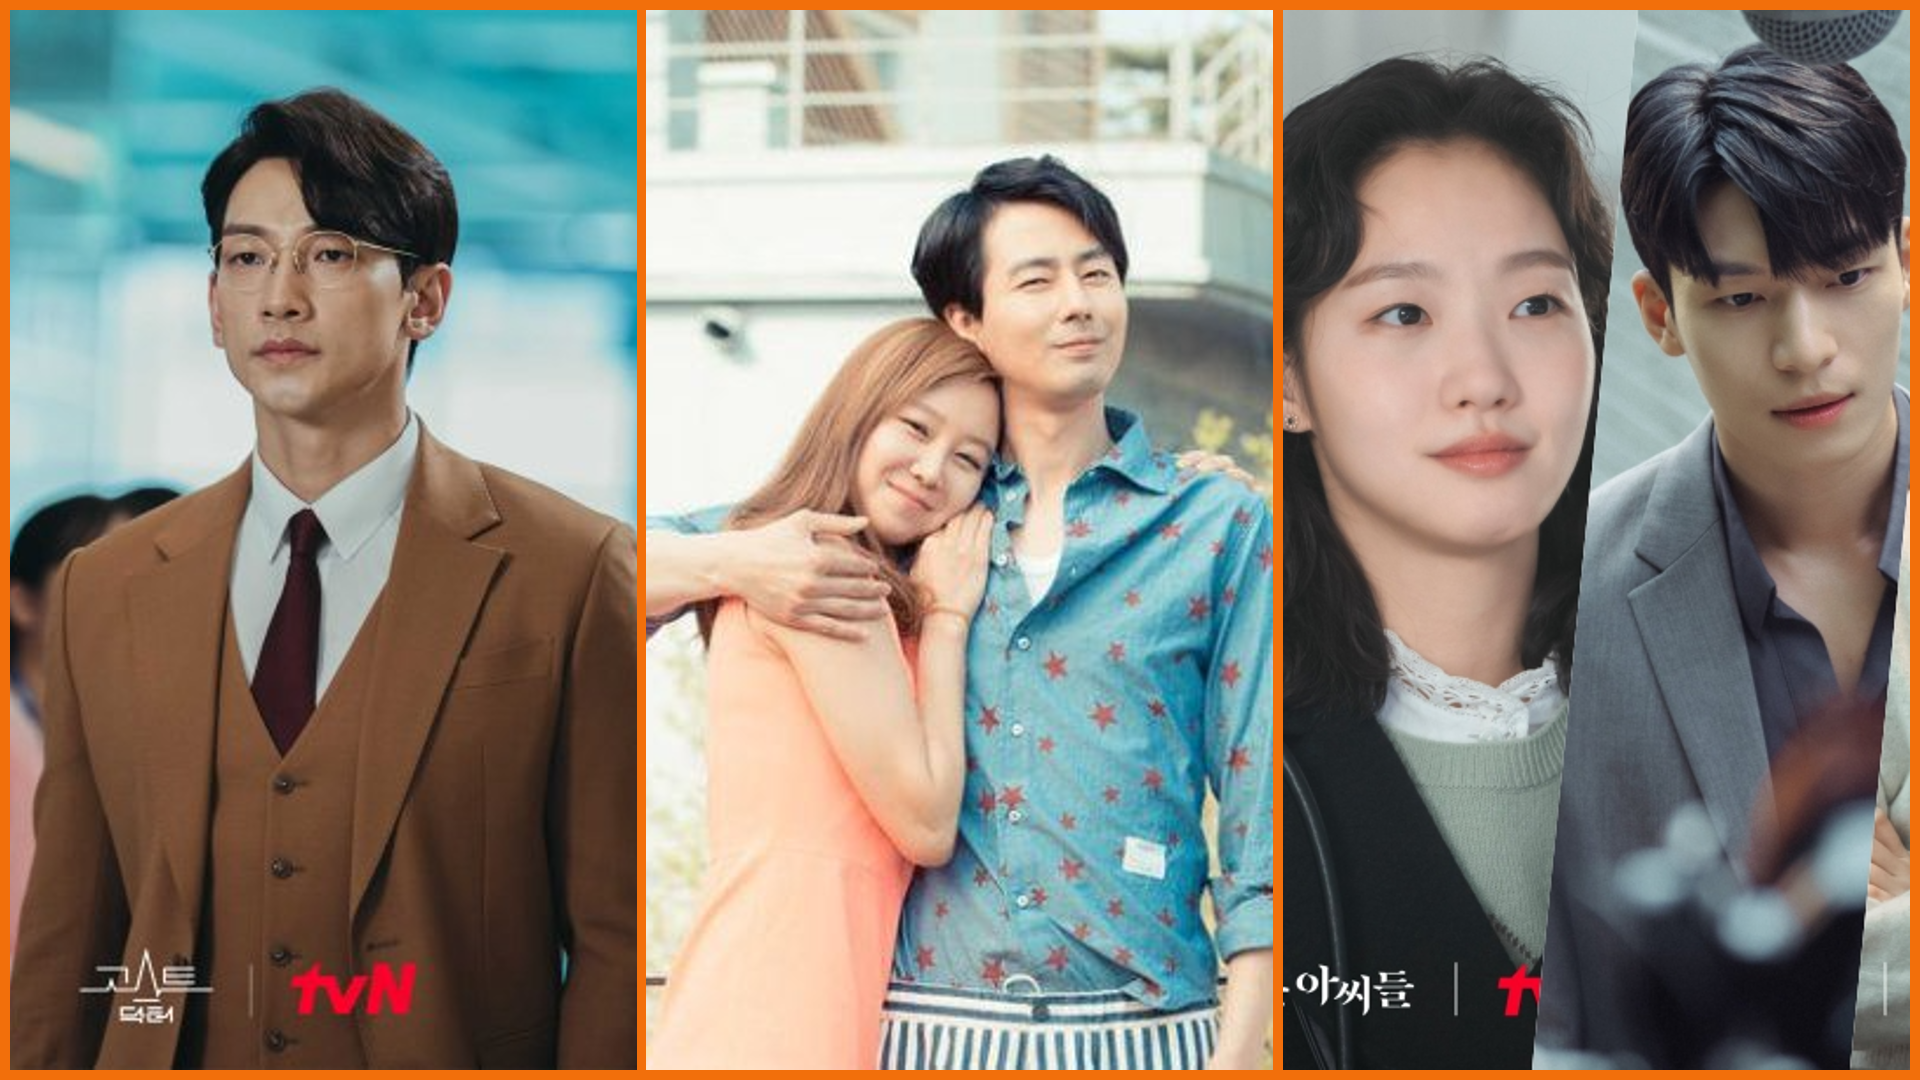 These 10 K-dramas will be worth your viewing time